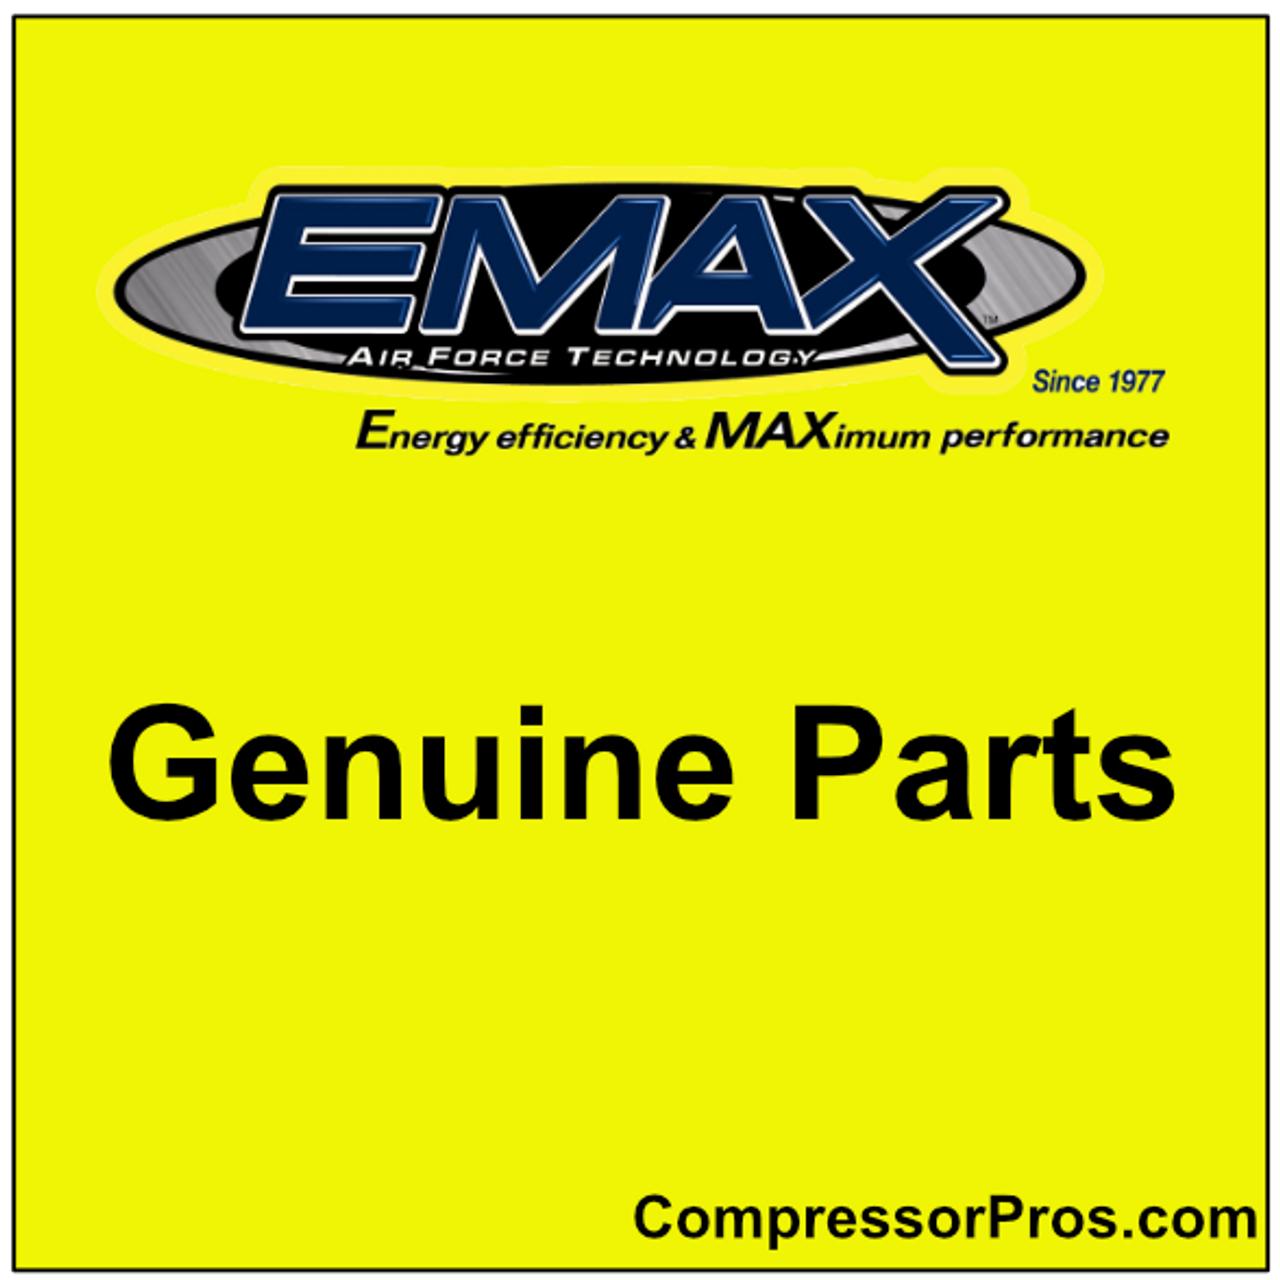 EMAX VFD065 Variable Speed Drive 40 HP